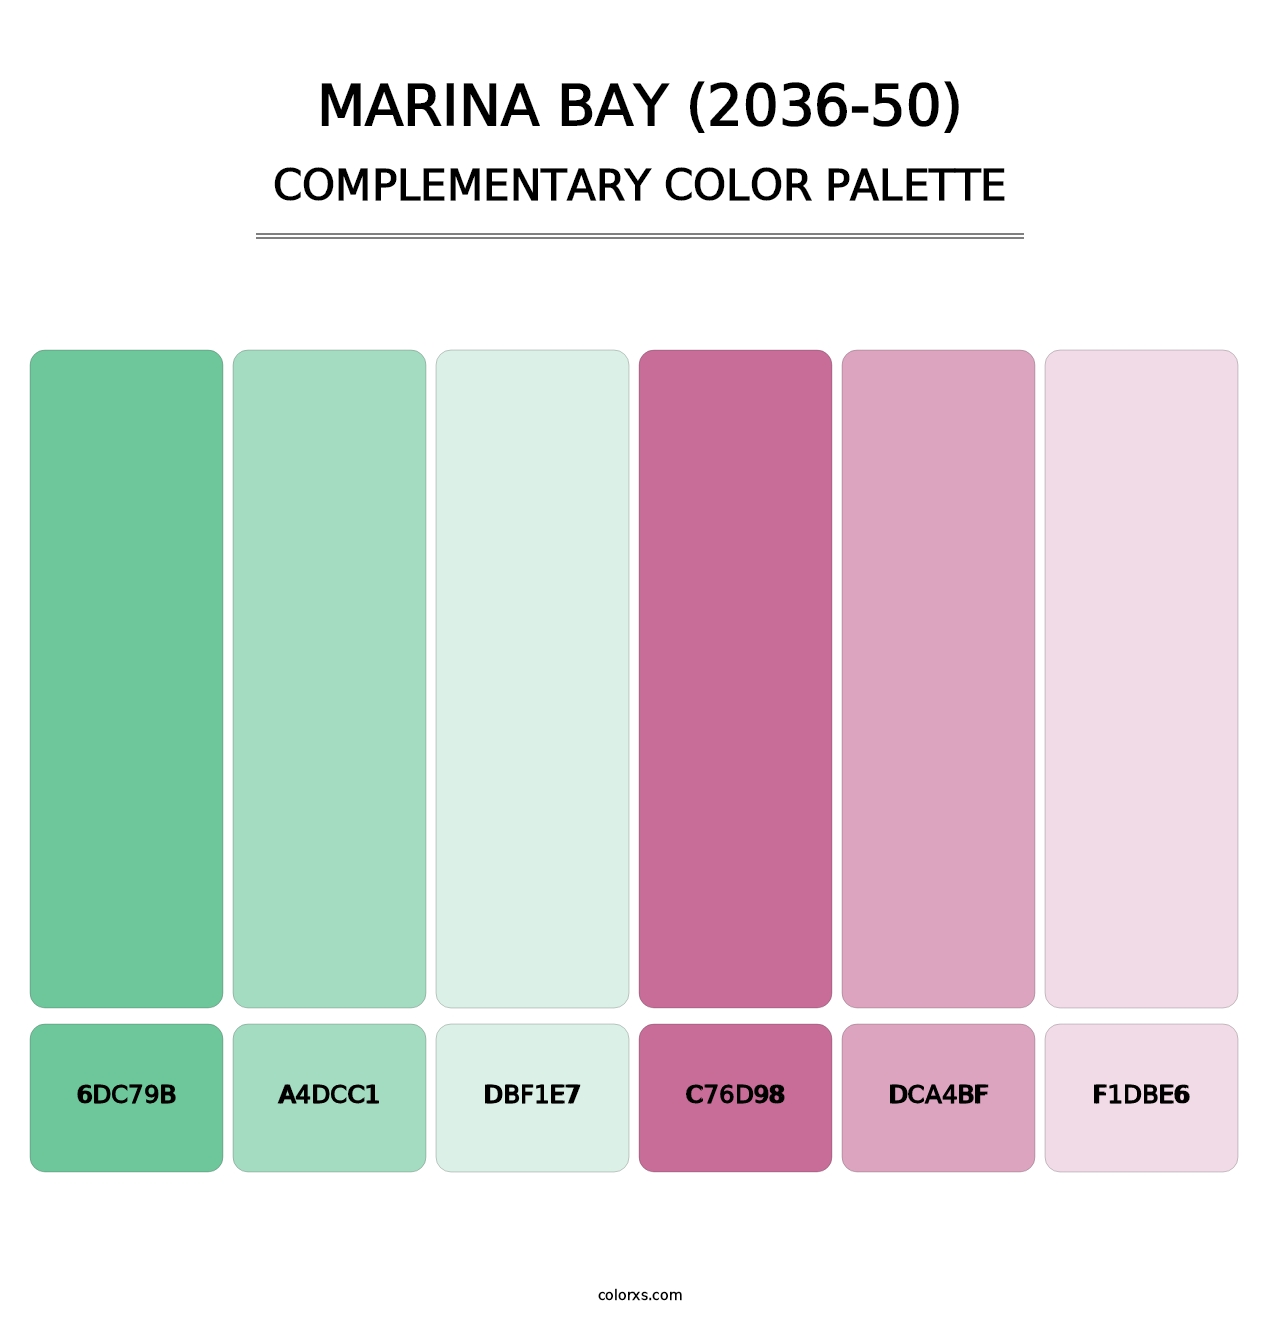 Marina Bay (2036-50) - Complementary Color Palette